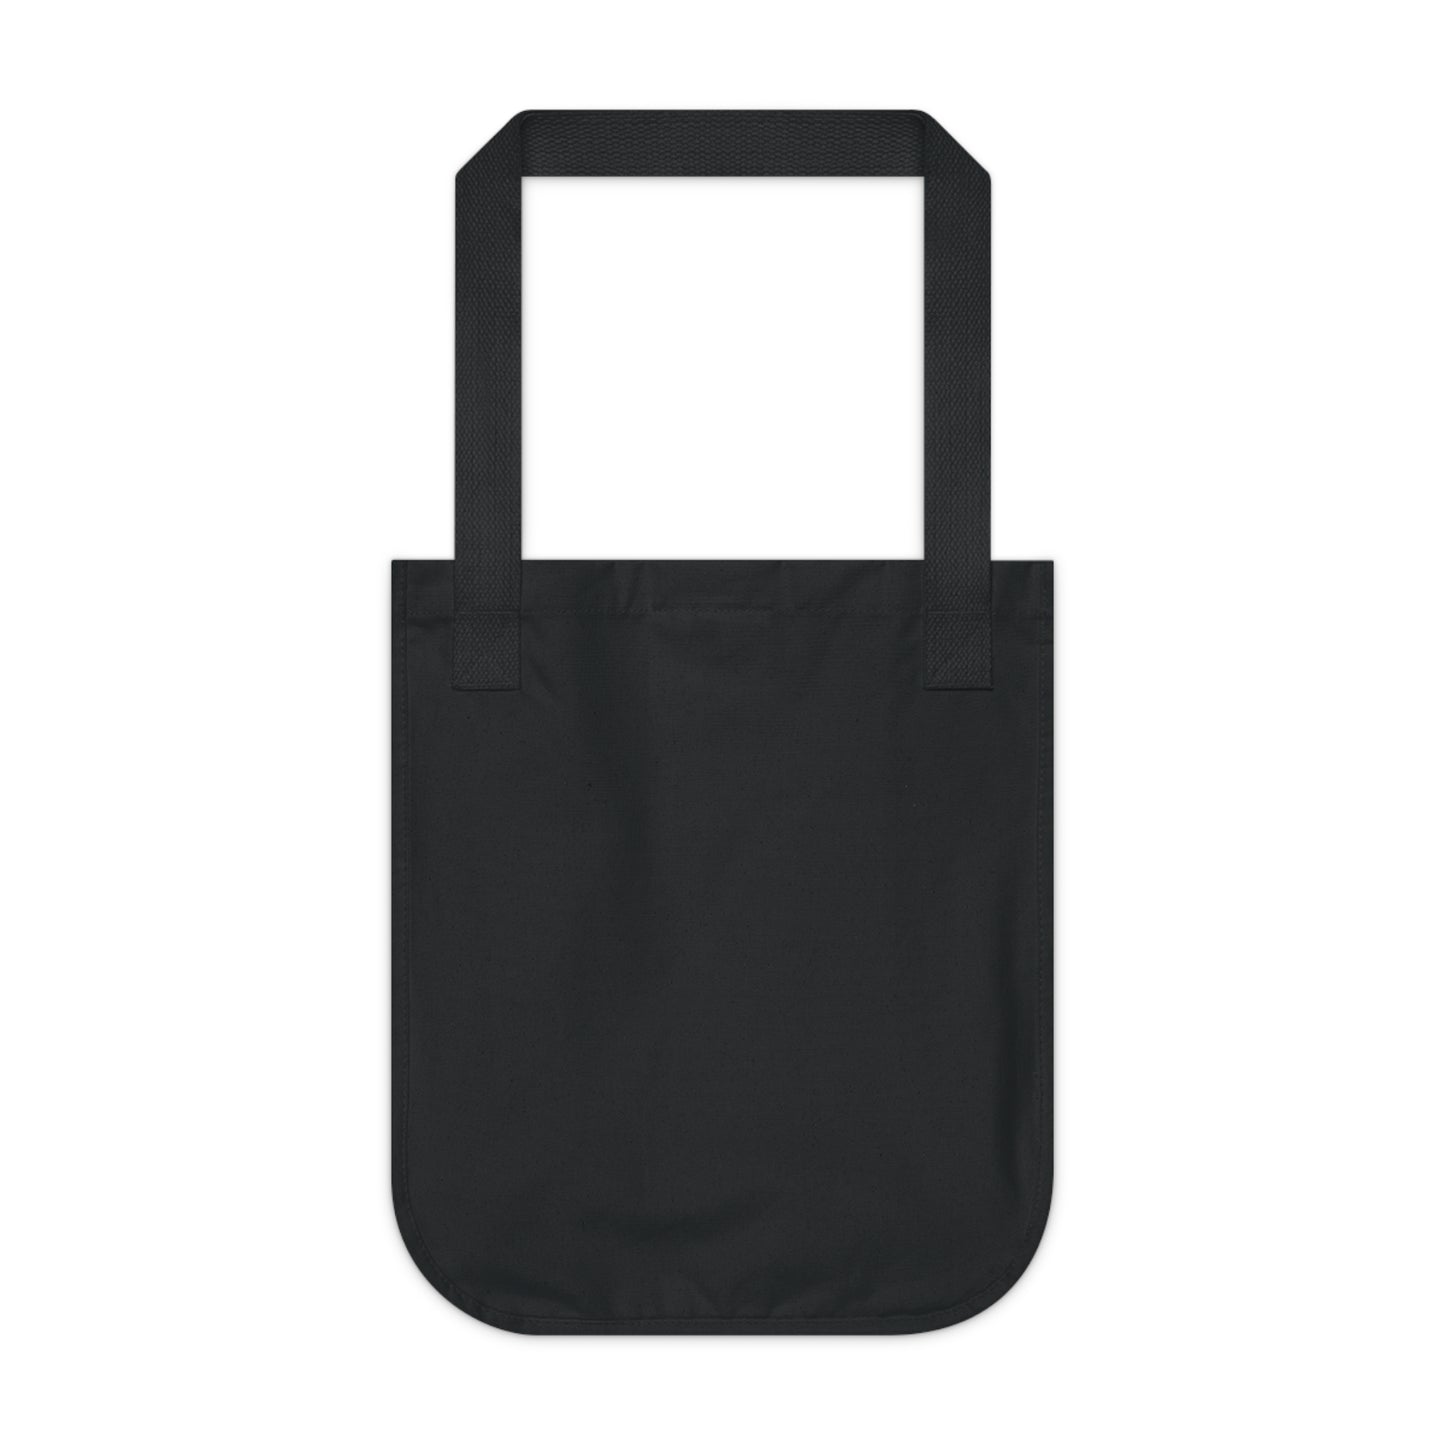 Bury Me In The H (Coffin Variant) Canvas Tote Bag